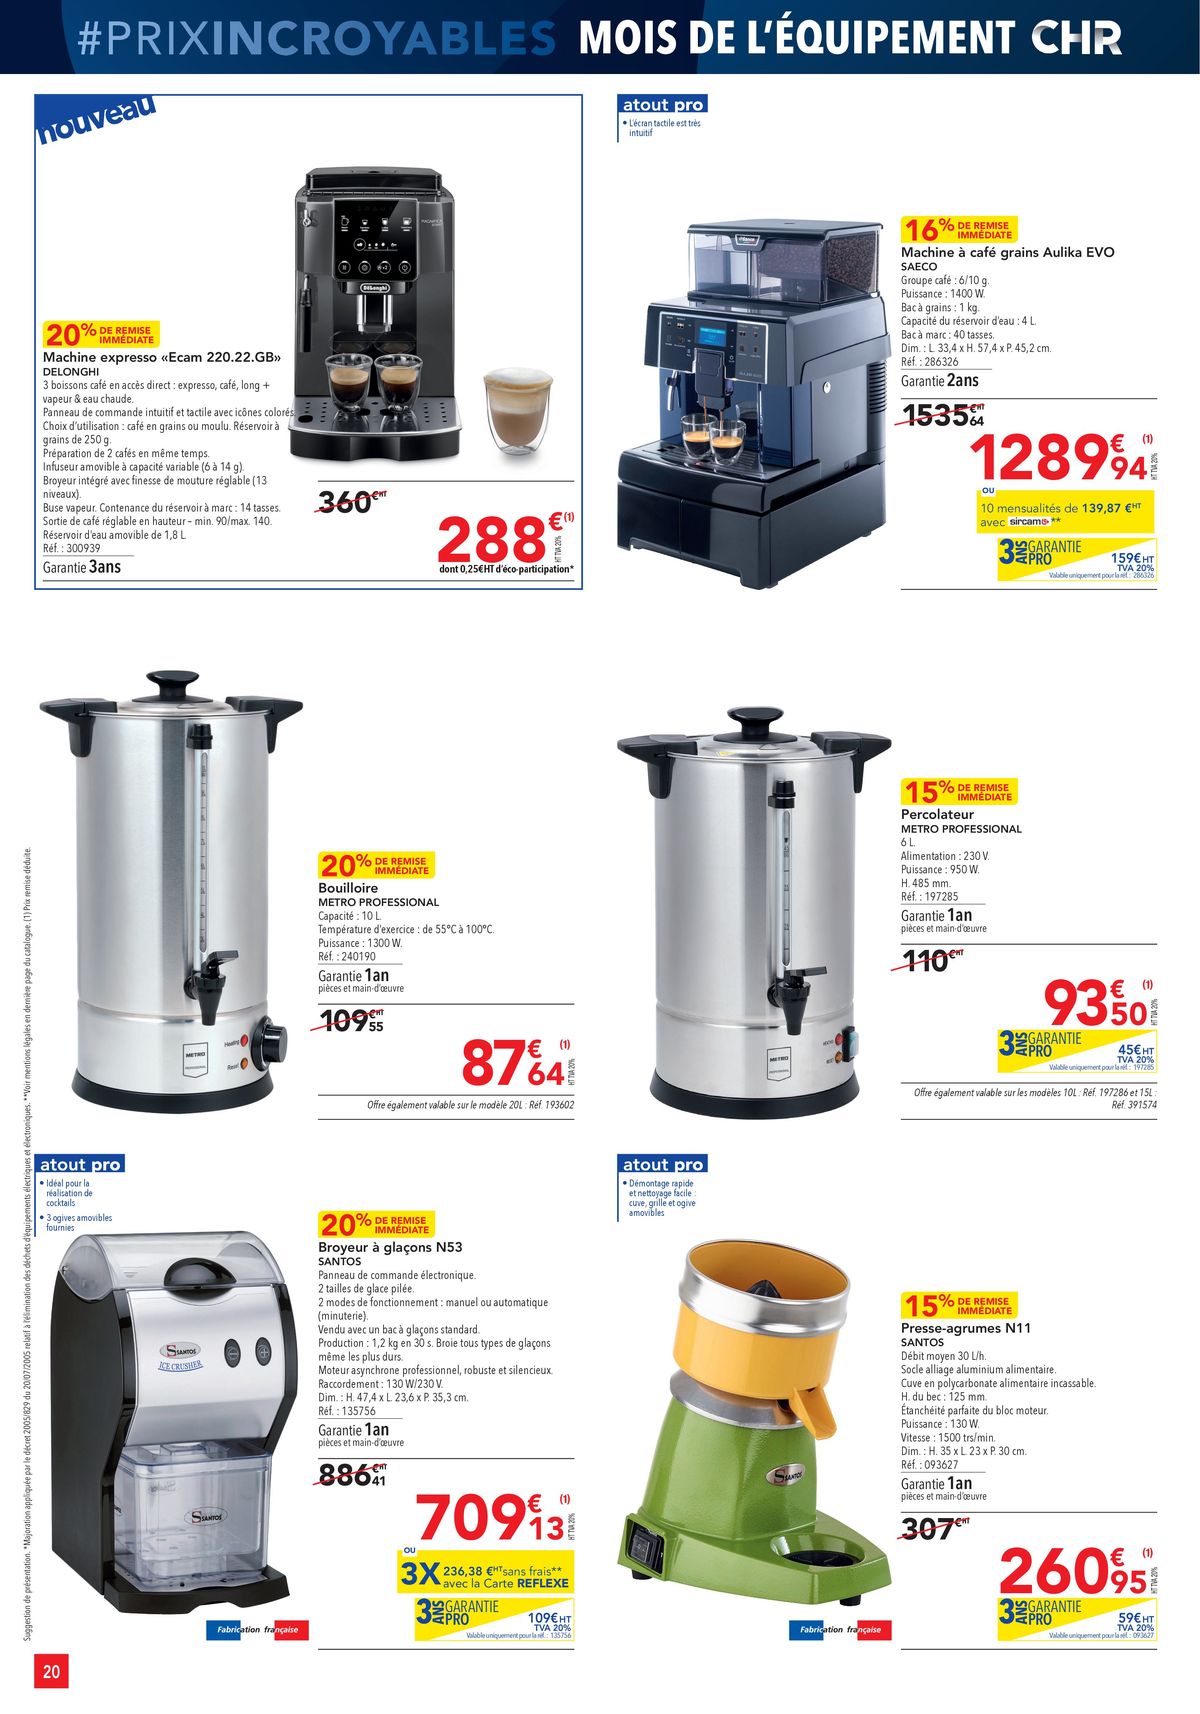 Catalogue SELECTION PROMO EQUIPEMENT, page 00020